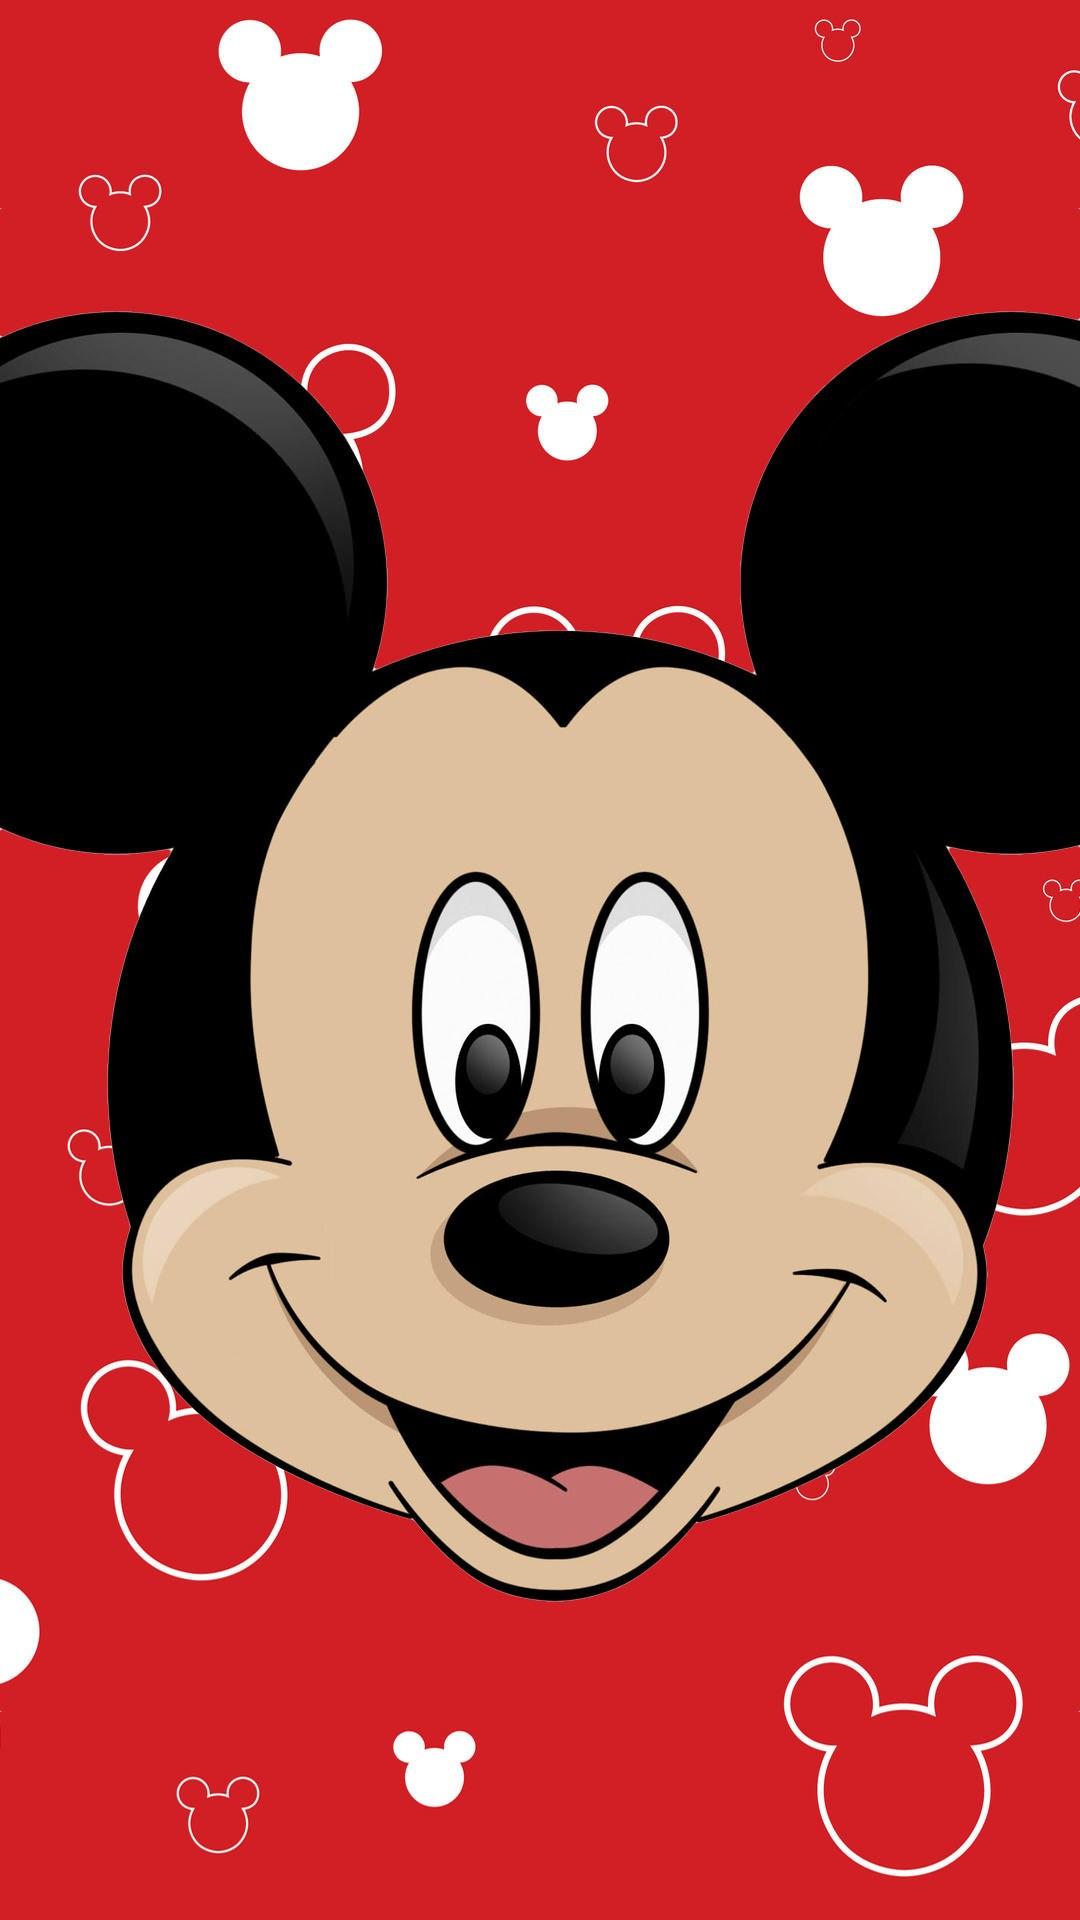 Supreme Mickey Mouse Wallpapers - Wallpaper Cave